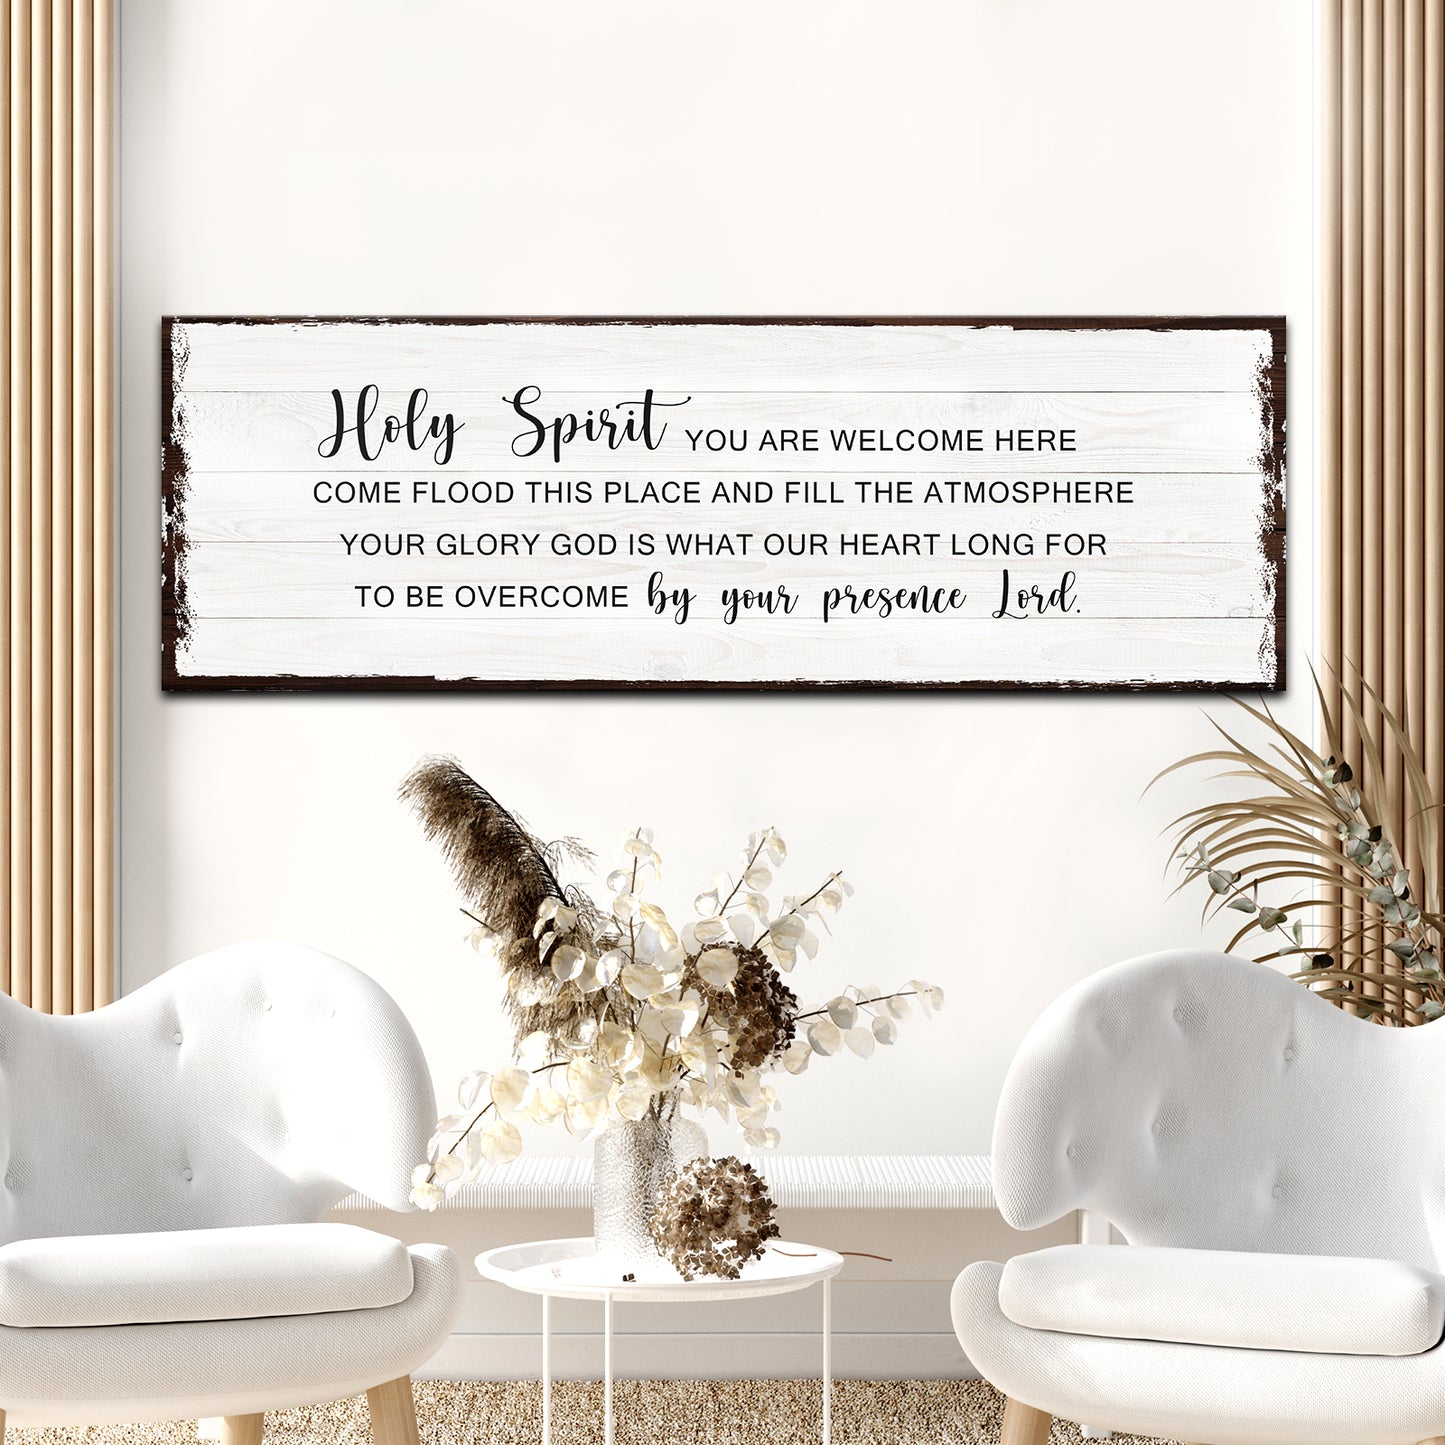 Holy Spirit Rustic Sign - Image by Tailored Canvases